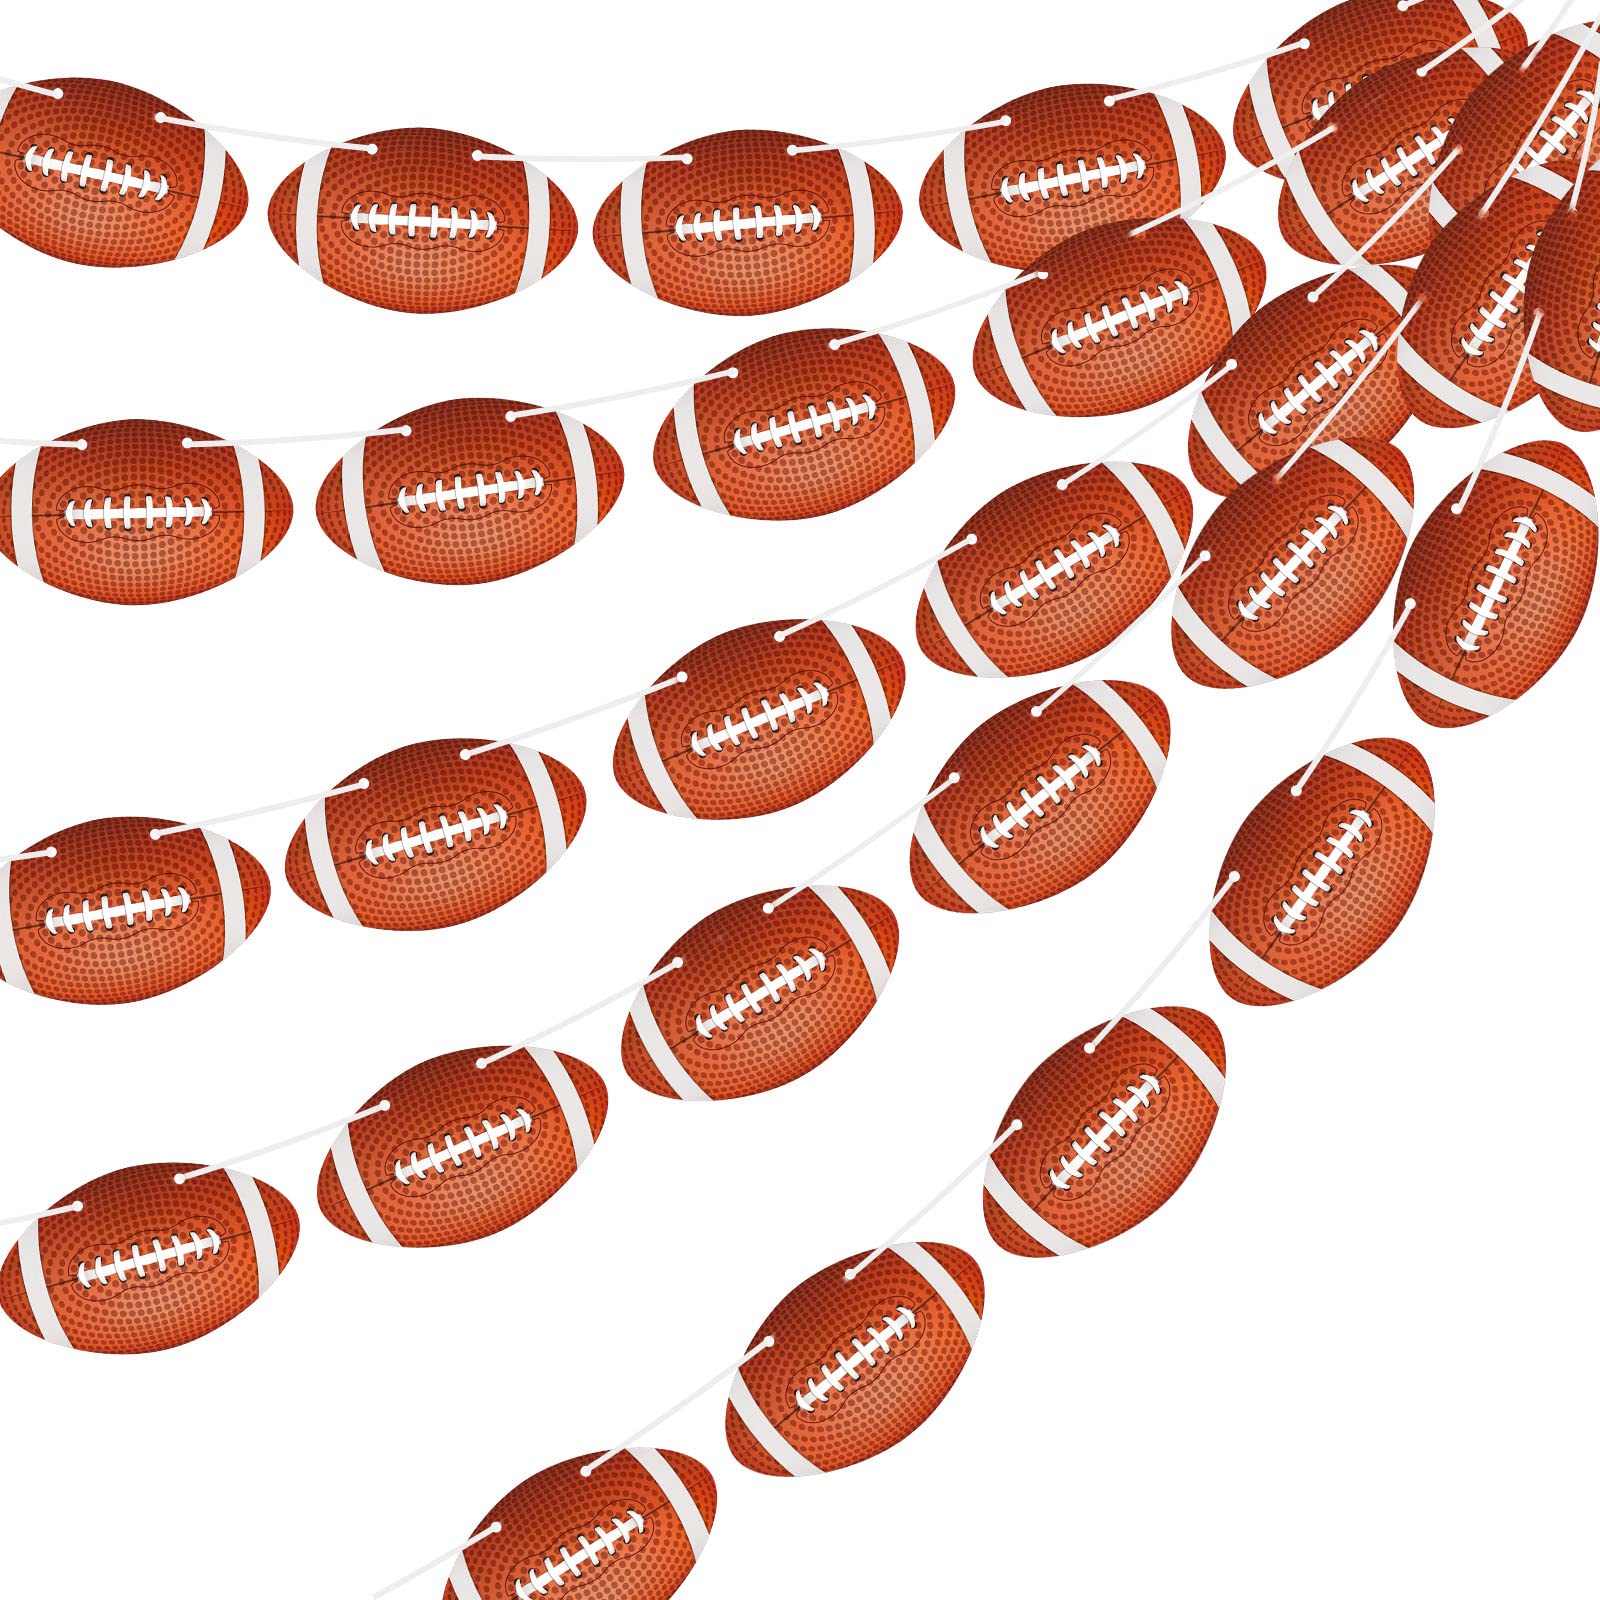 6 Pieces Football Banner Party Decorations Sports Paper Bunting Game Day Birthday Garland Football Theme Hanging Banners Assembled for Home Wall Decor School Party Favor Supplies Photo Props Backdrop